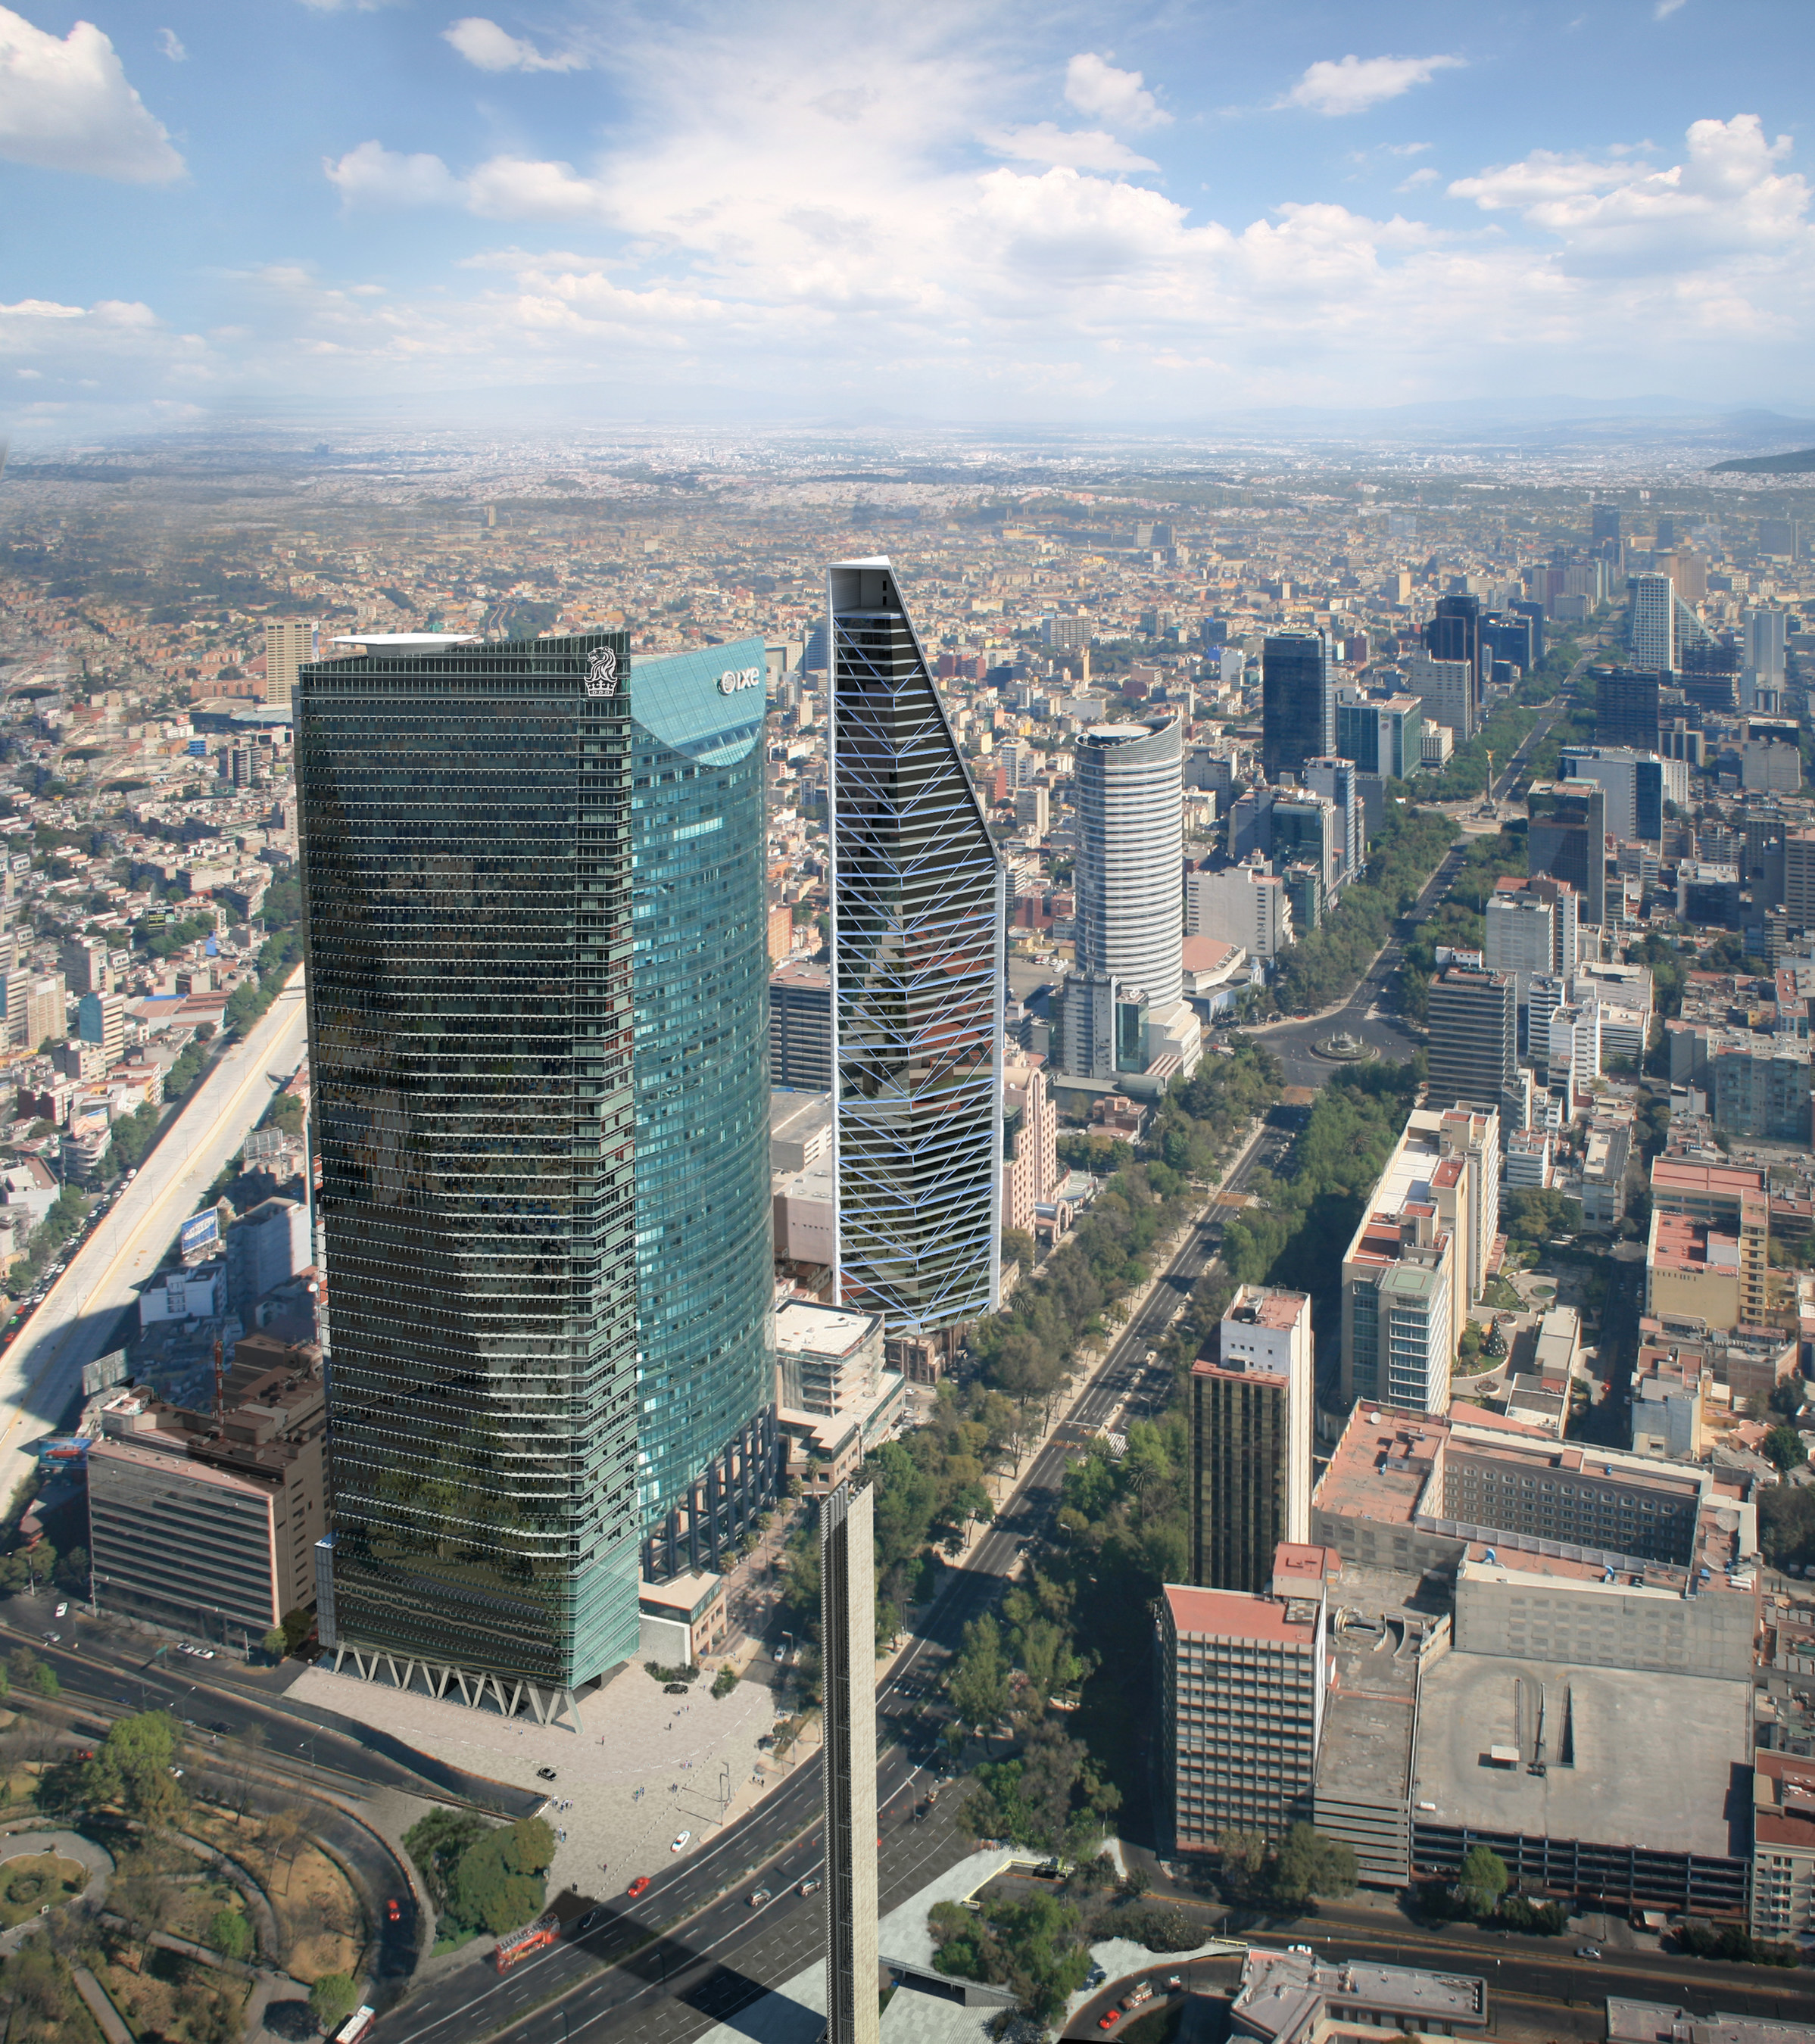 The Ritz-Carlton Set to Debut in Mexico City in 2019; legendary luxury hotel brand to introduce stunning new hotel on Avenida Reforma